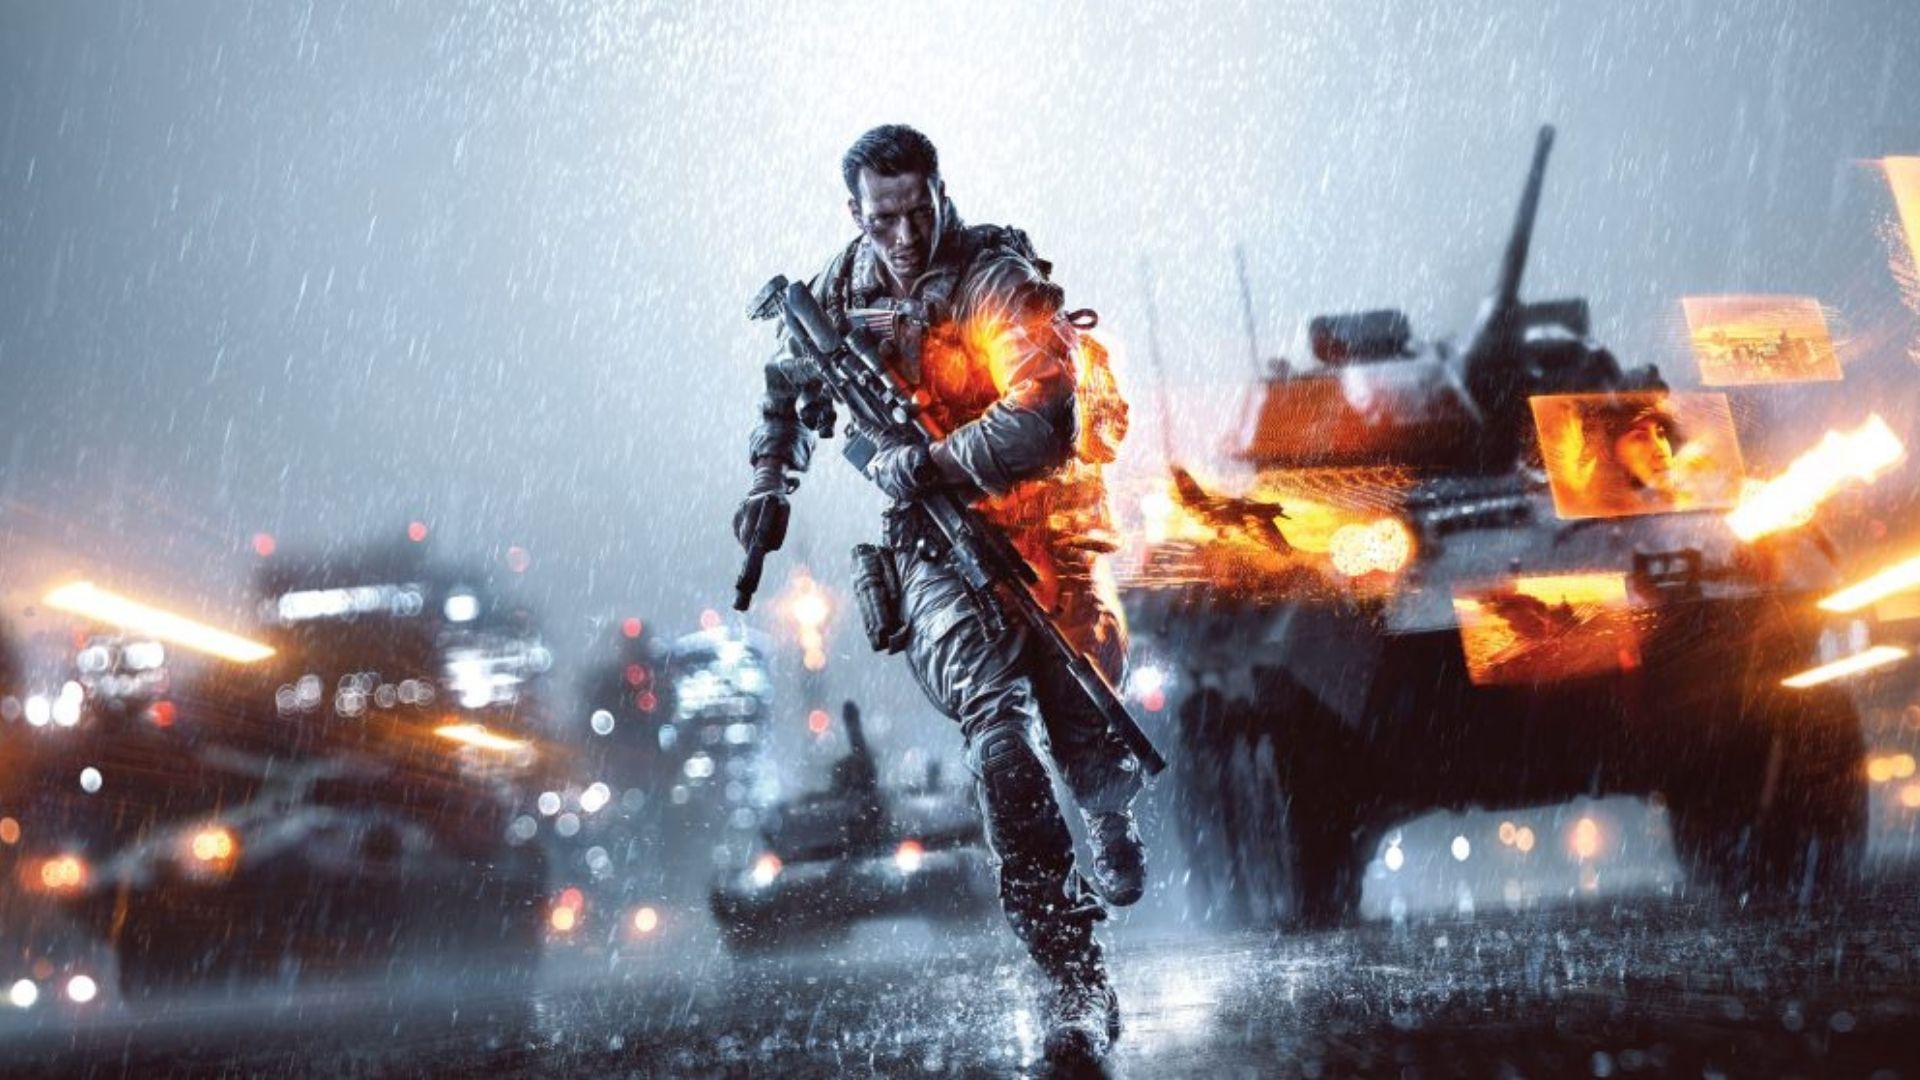 Battlefield 1, Hardline, BF4 Servers Are Being Taken Offline by Cheaters;  EA Silent on Issue